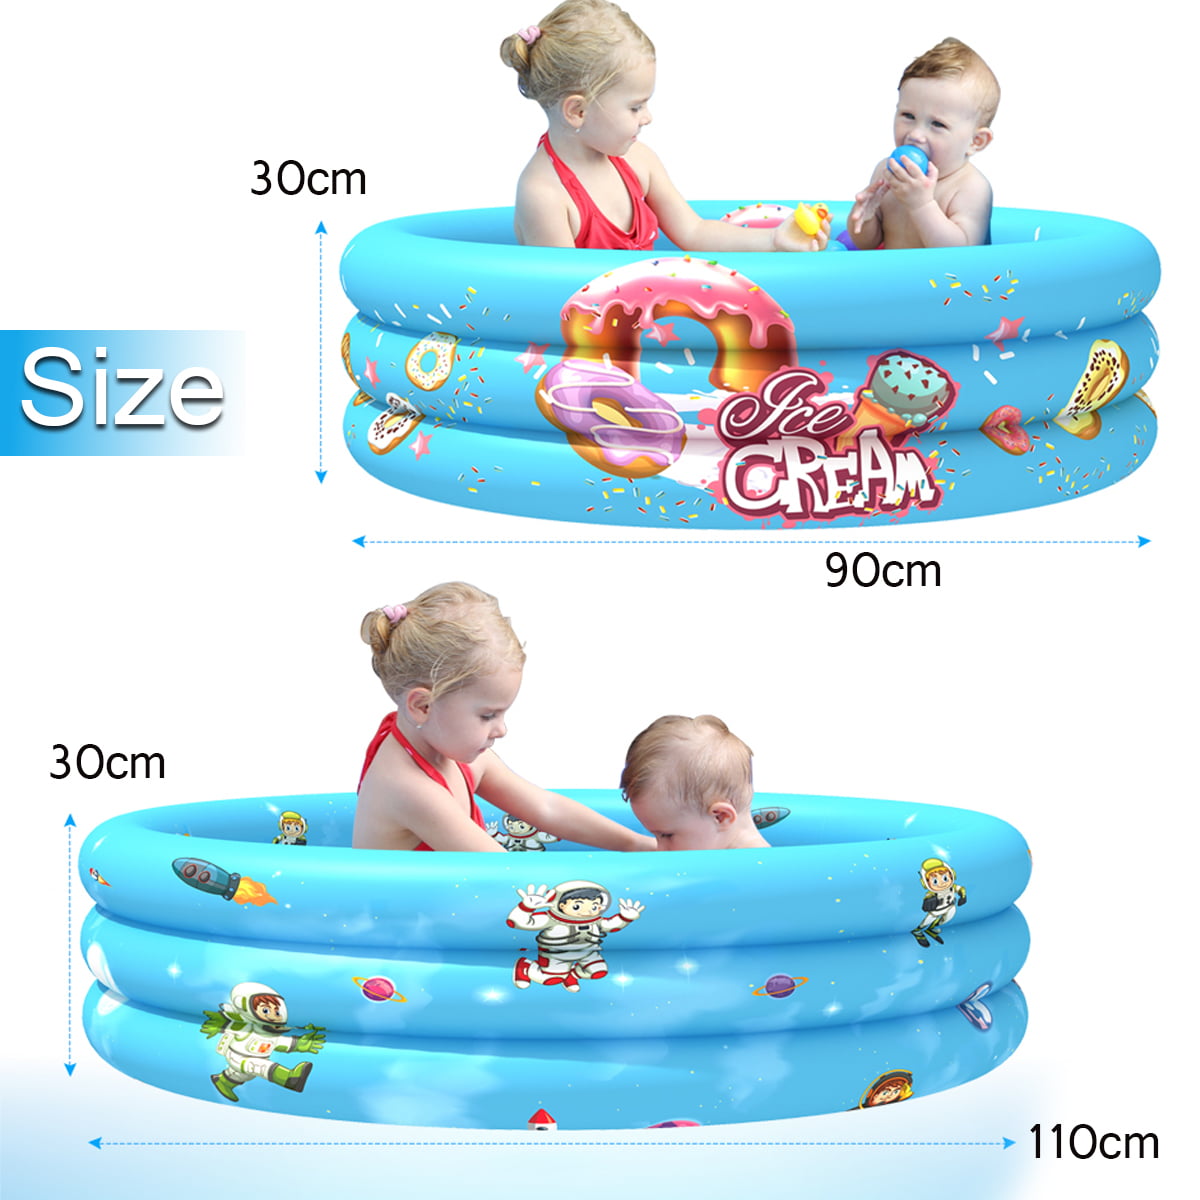 Details about   Kids Play Ball Pool Baby swimming Pool Child Summer Inflatable Bath Tub 